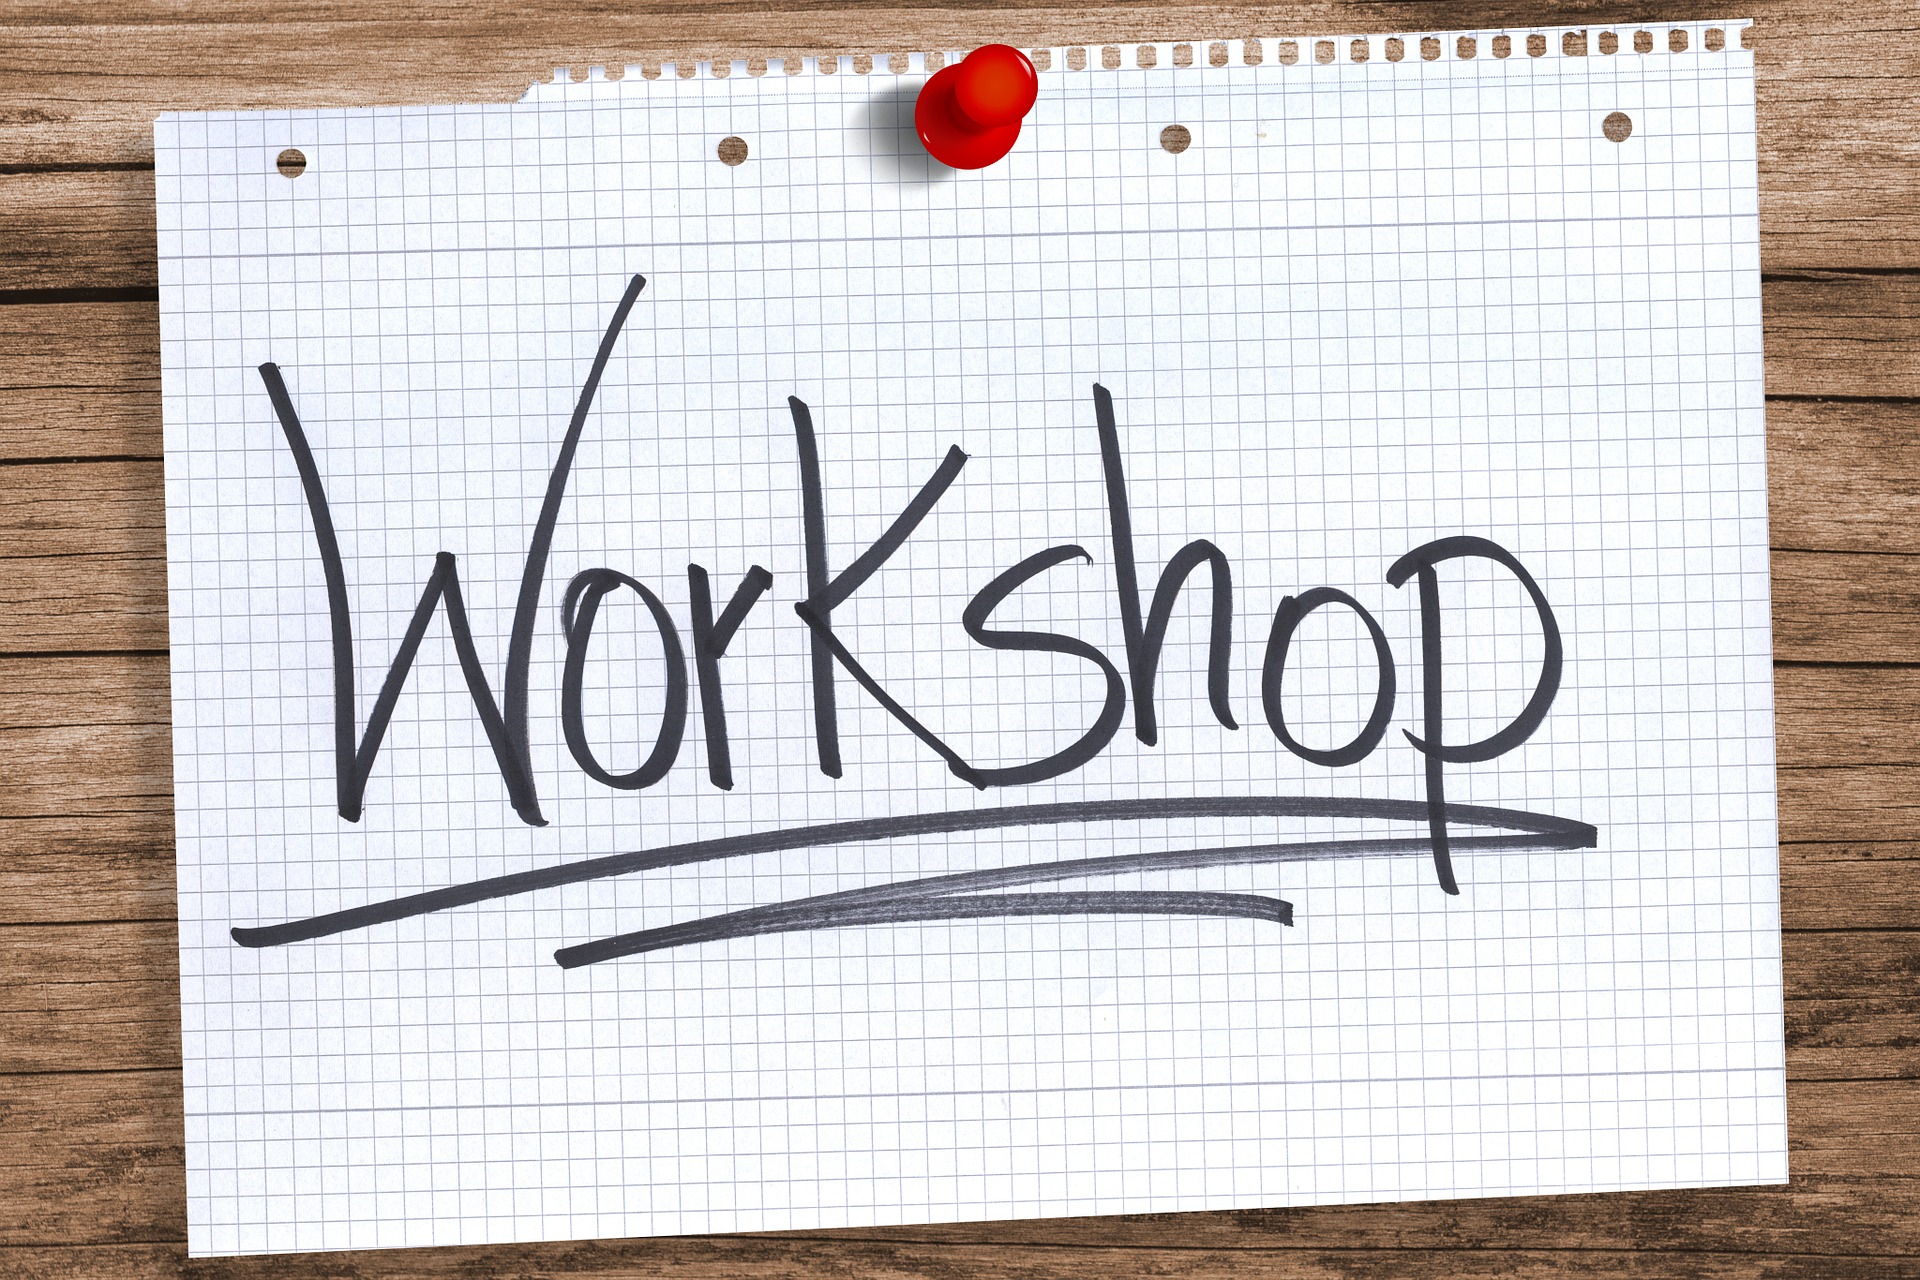 The word "Workshop" written and underlined on a torn piece of paper.